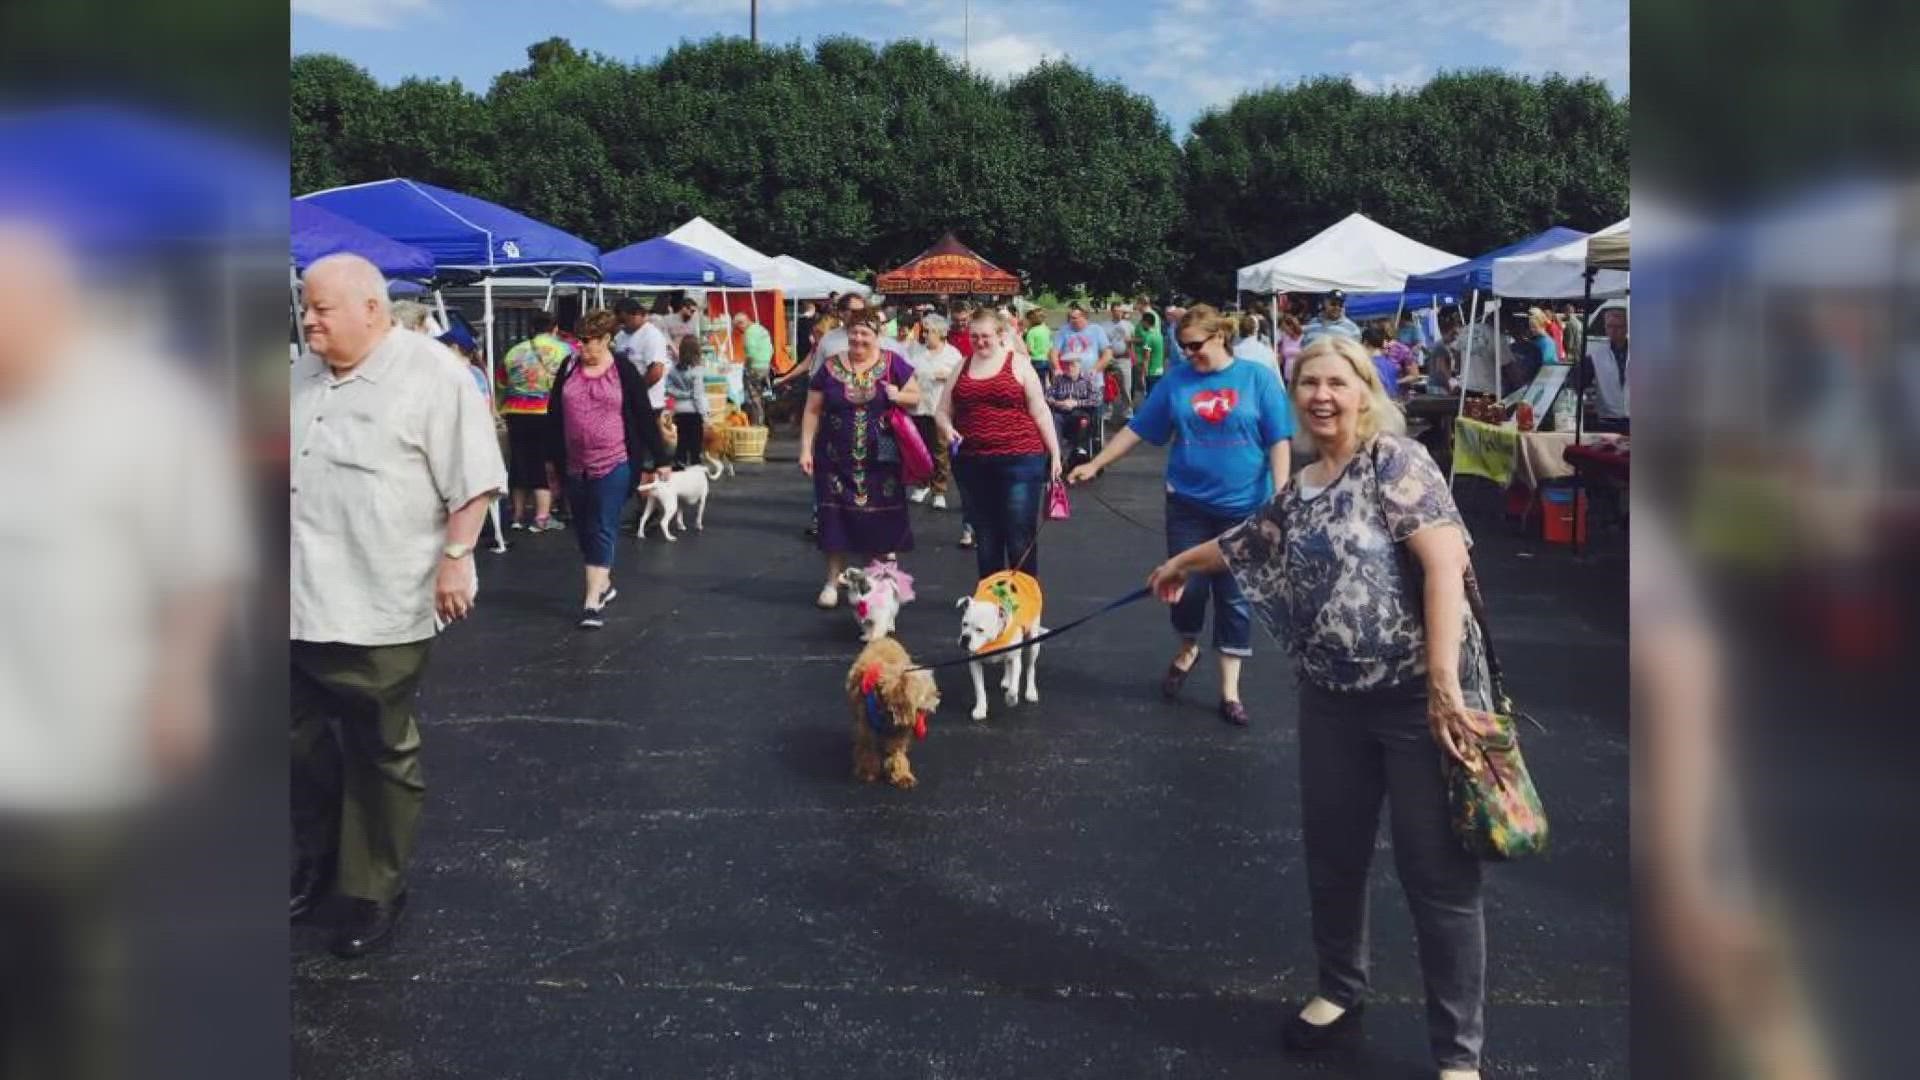 Grab the leash and bring your pup to the corner of Landmarks Boulevard and Henry Street for a pet-focused festival starting at 10 a.m.